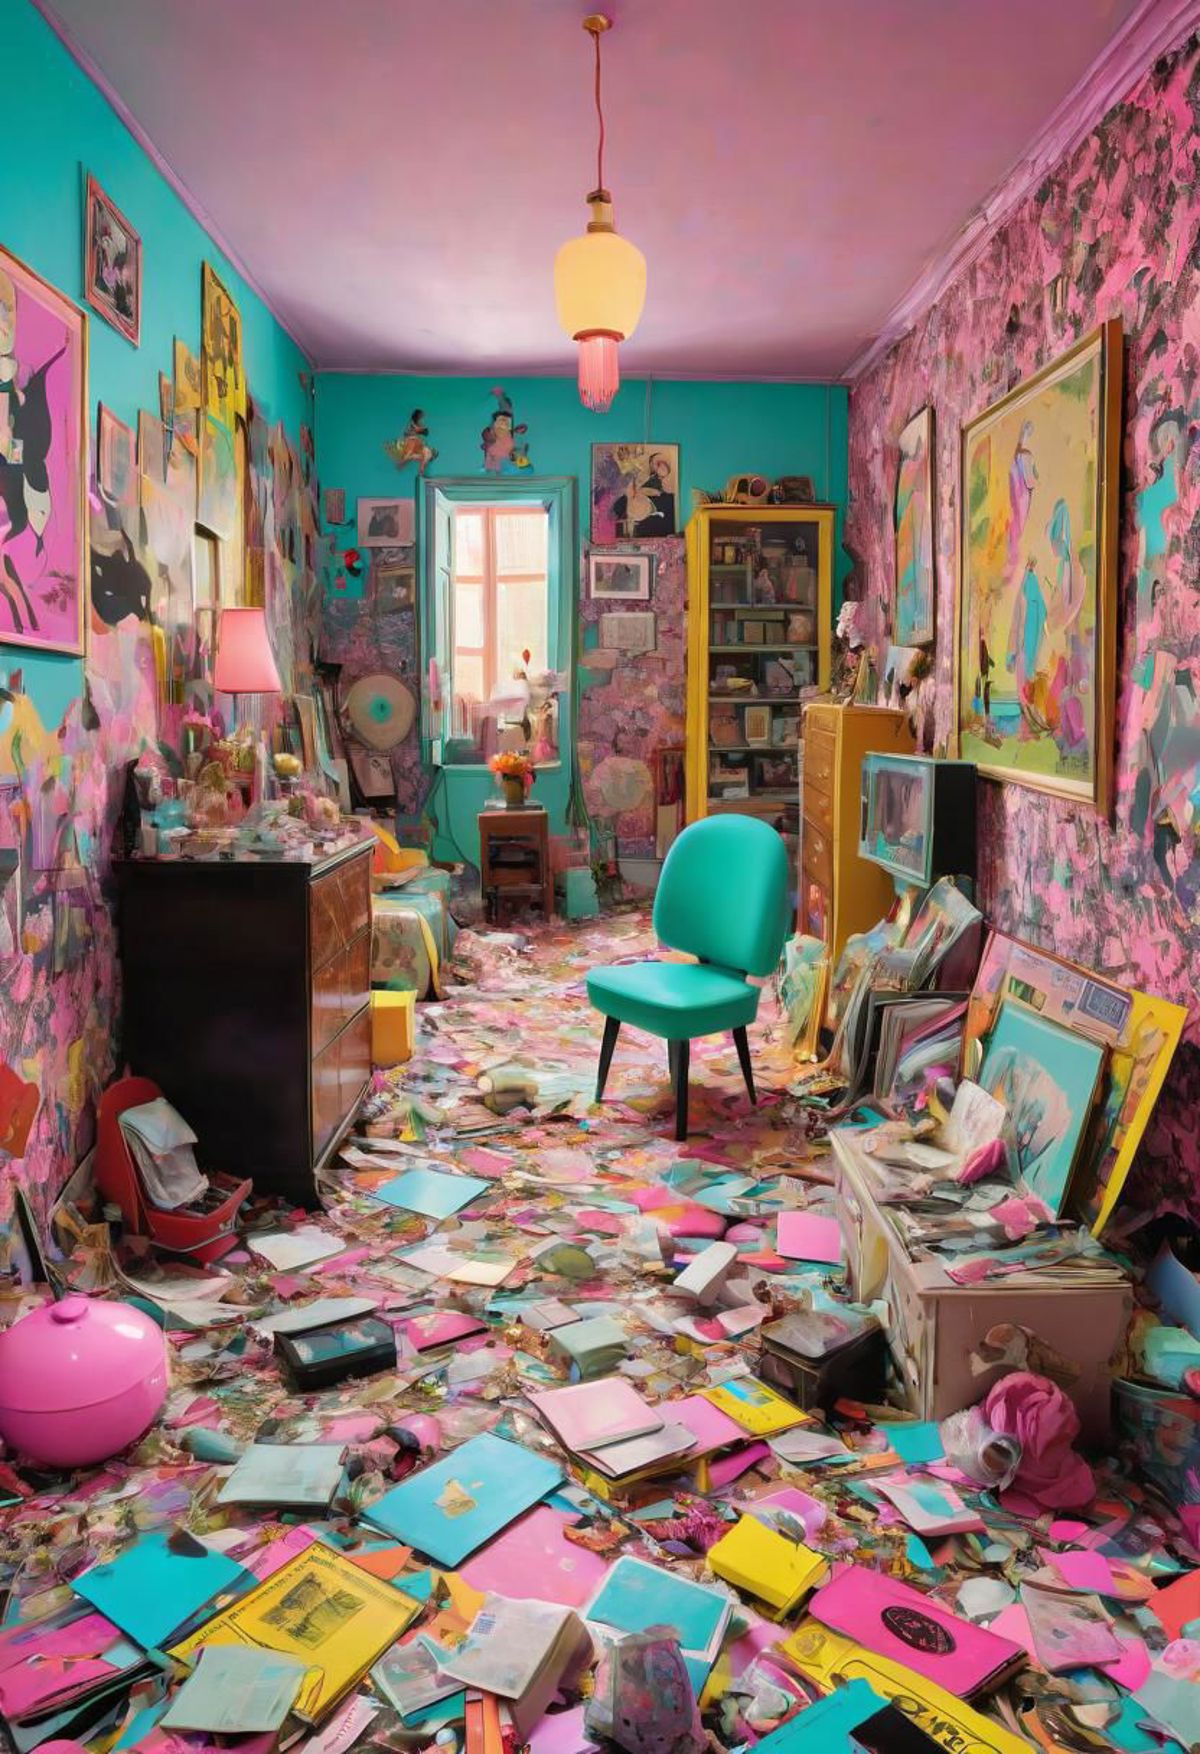 Messy Pink Room with a Chair, Bookcase, and Lamps